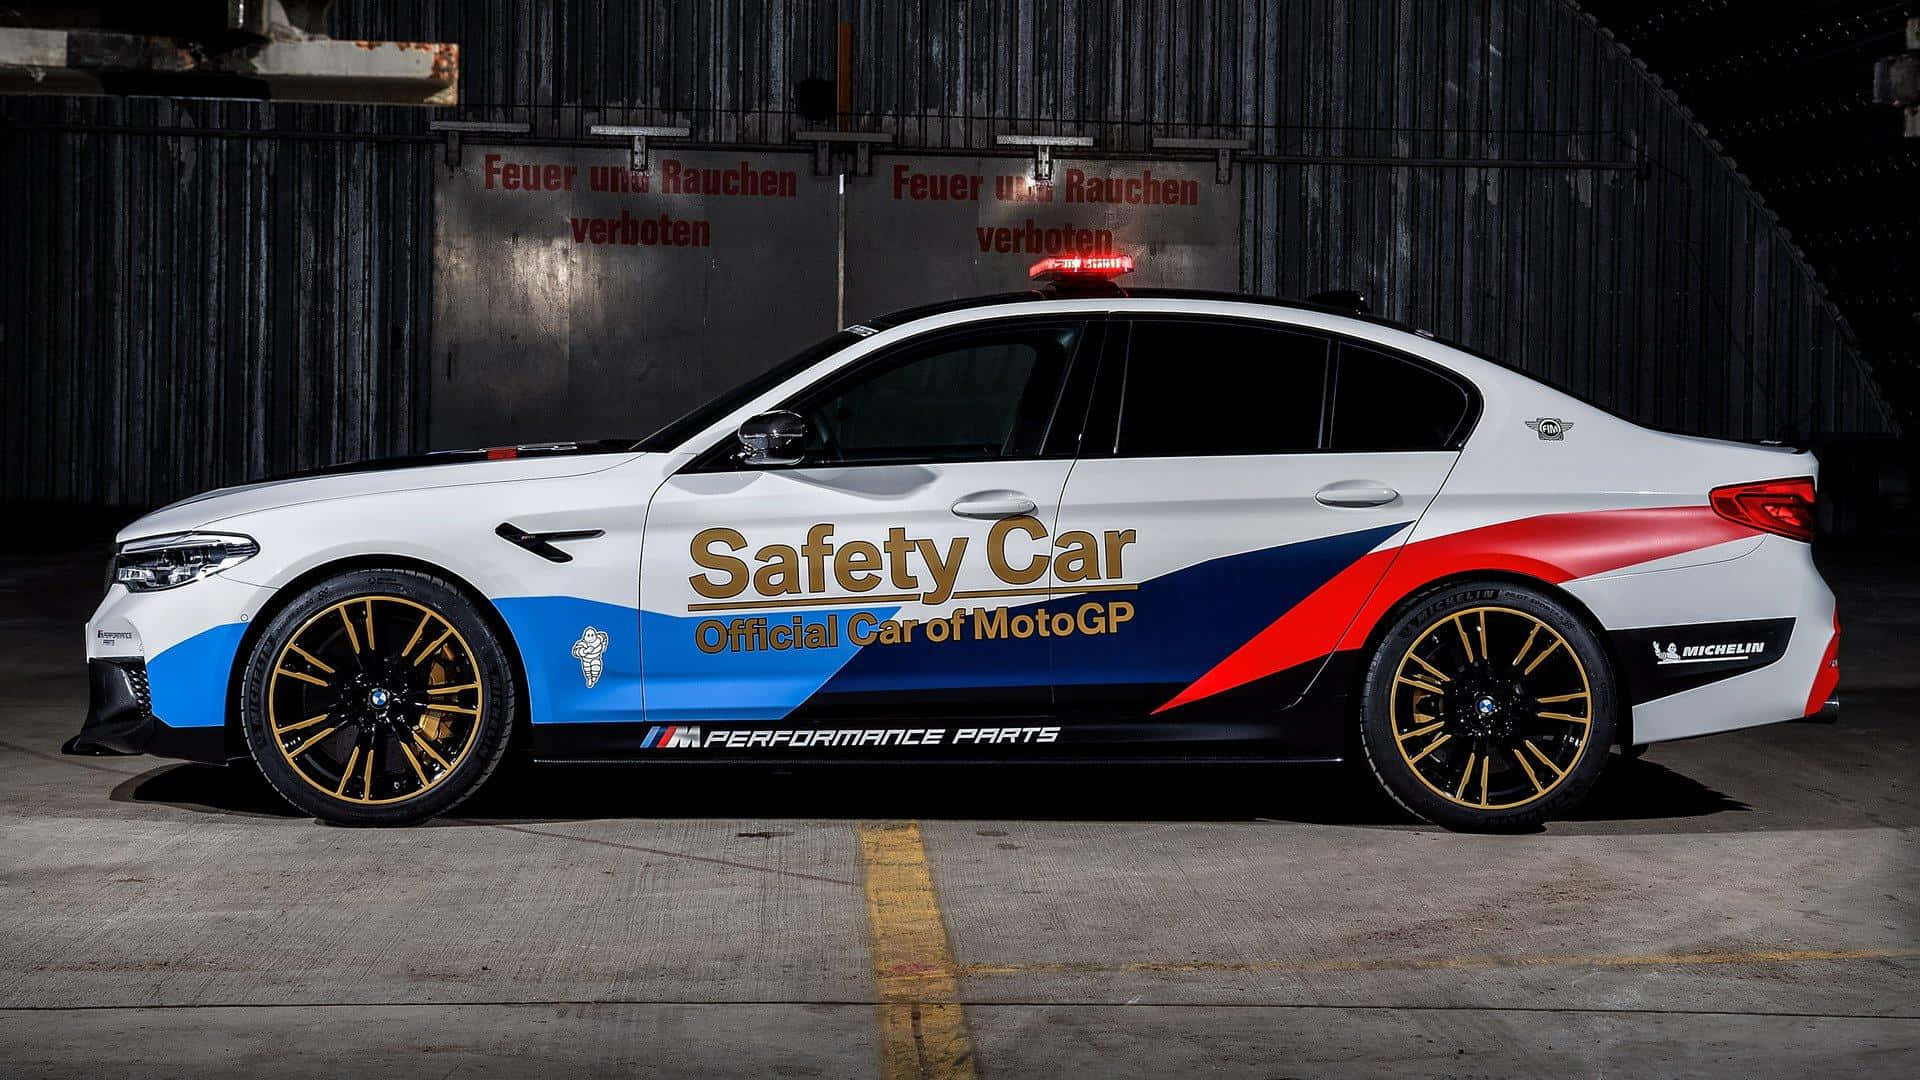 A vibrant safety car on the racetrack ensuring the security of drivers Wallpaper